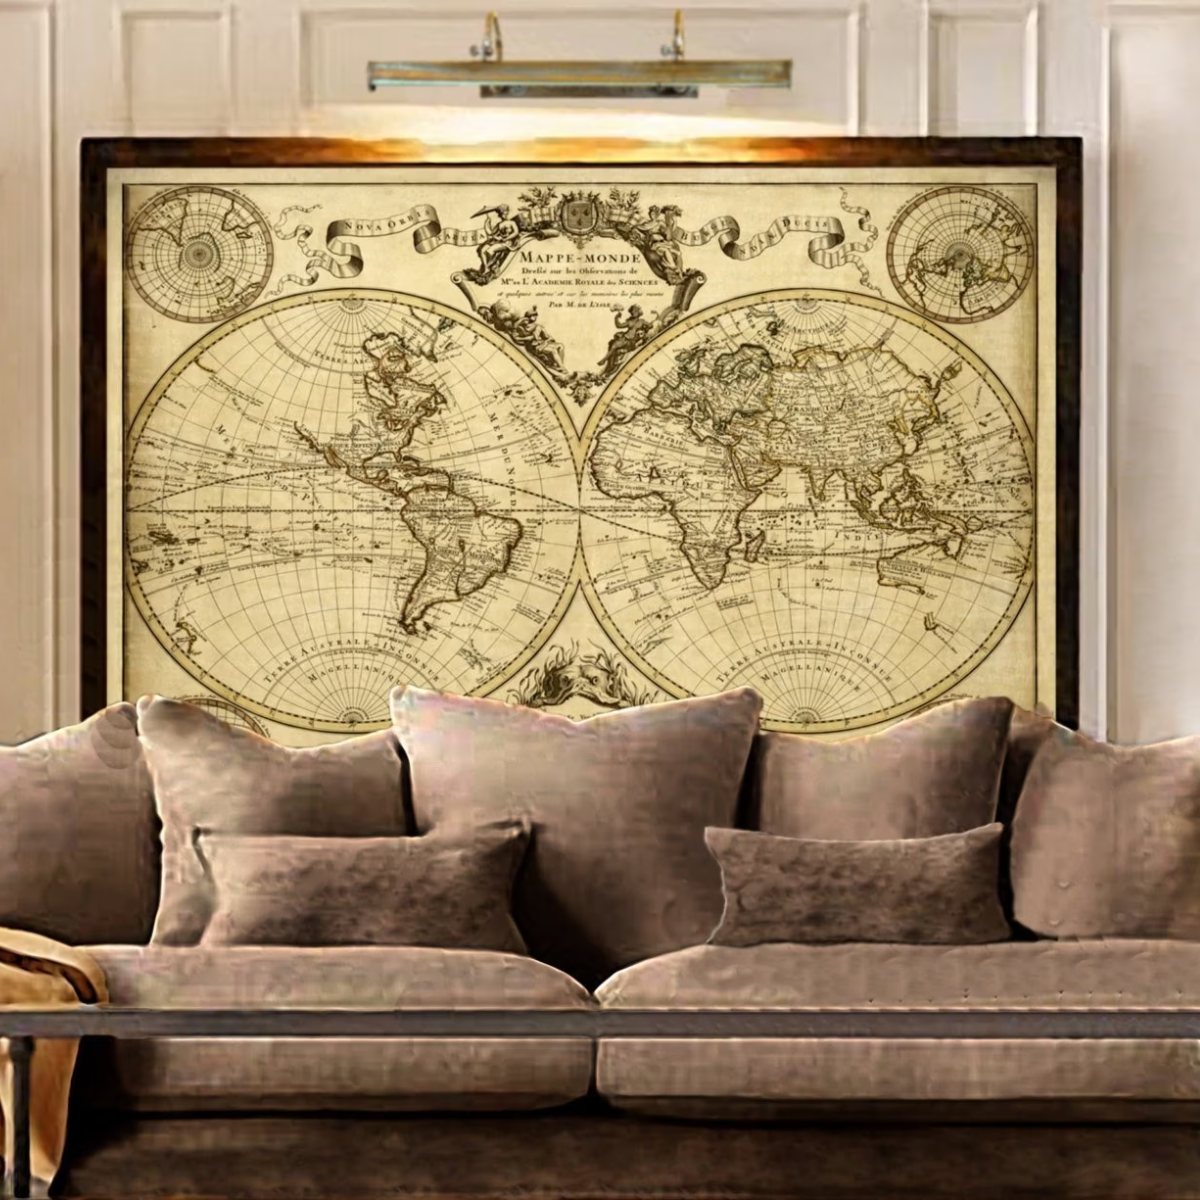 4. Vintage Map Wall Art: A Unique and Thoughtful Anniversary Gift for Him